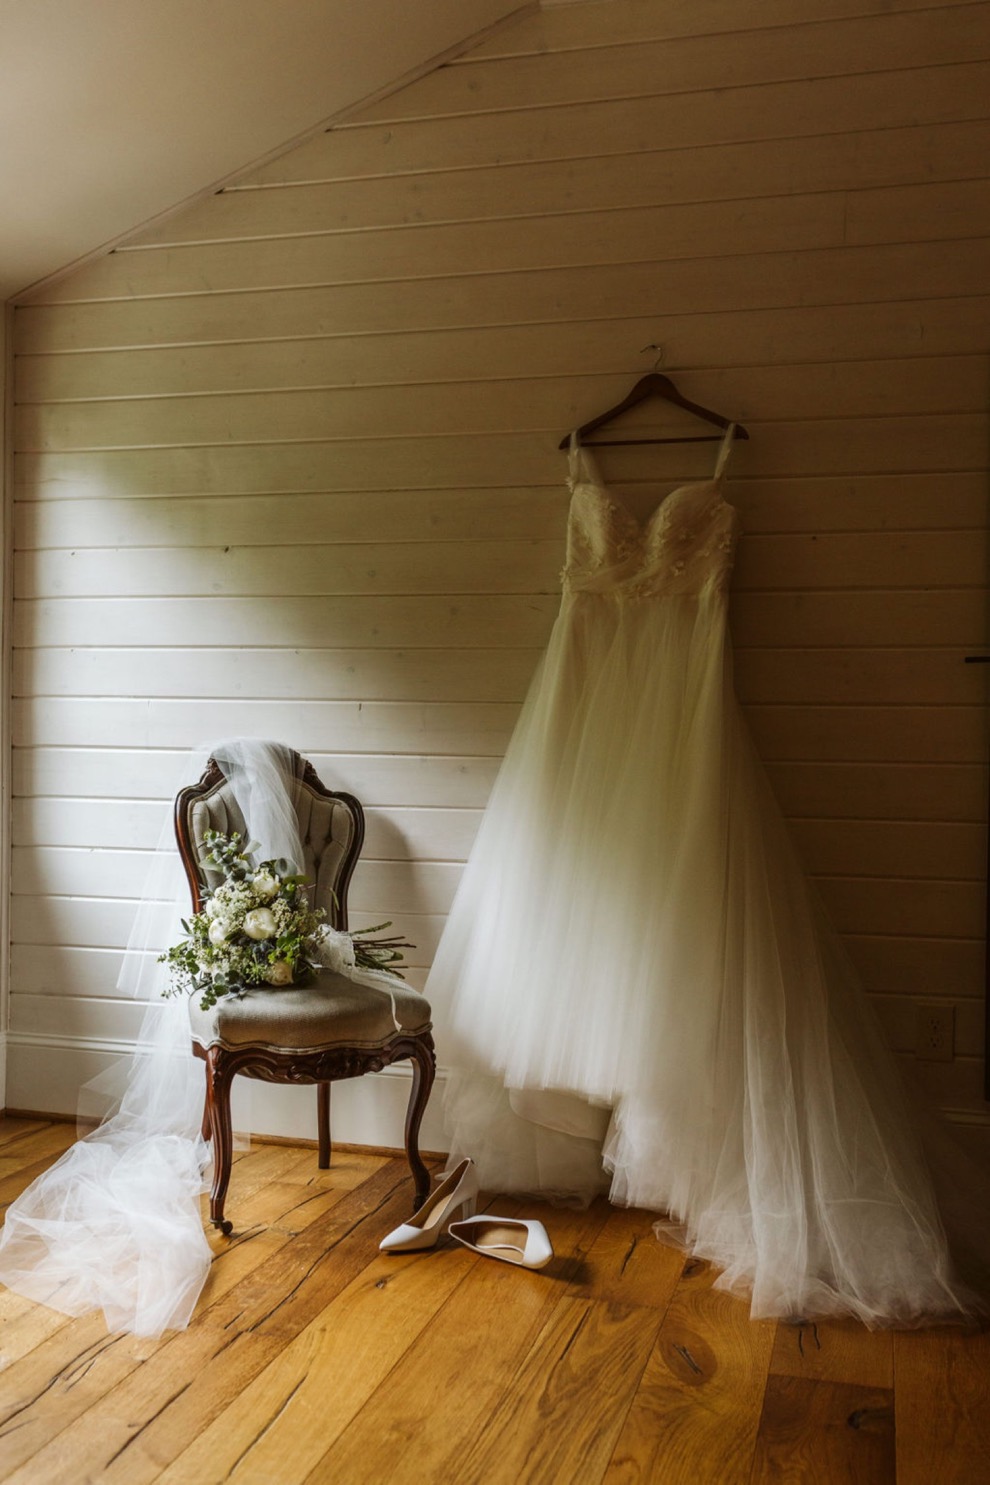 wedding dress hanging on shiplap white wall. Bride's veil and bouquet sit on an antique chair.